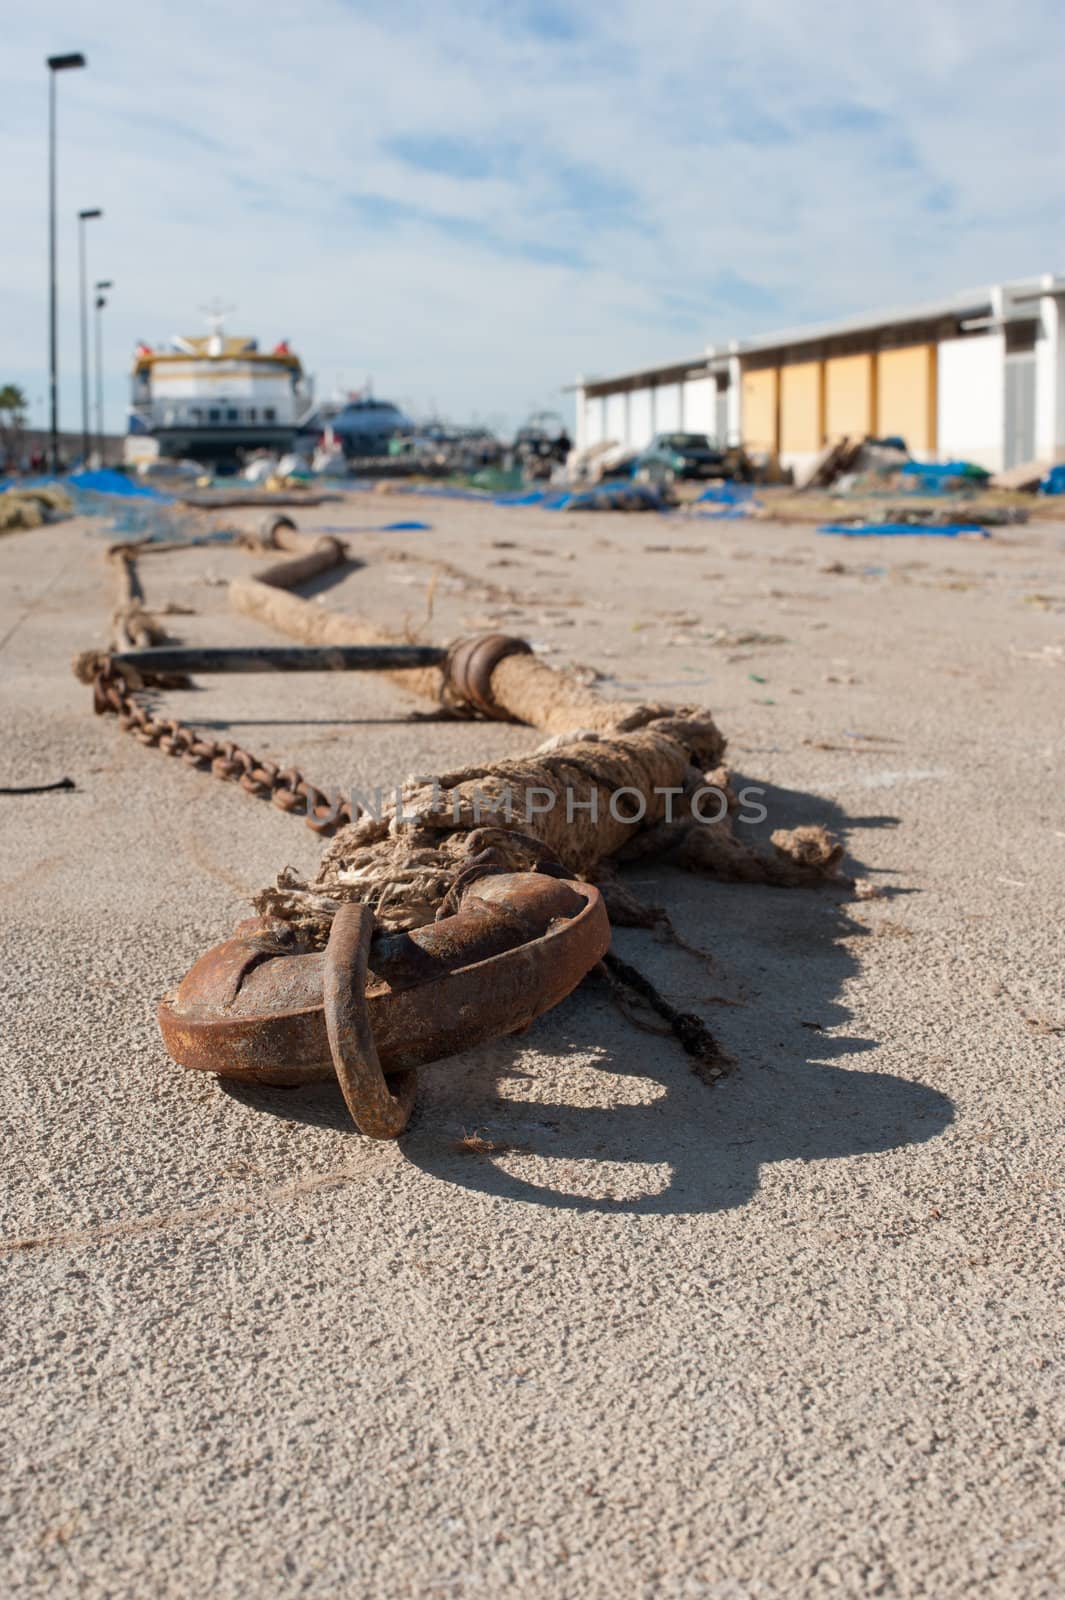 Hook and chain of a fishing trawler net